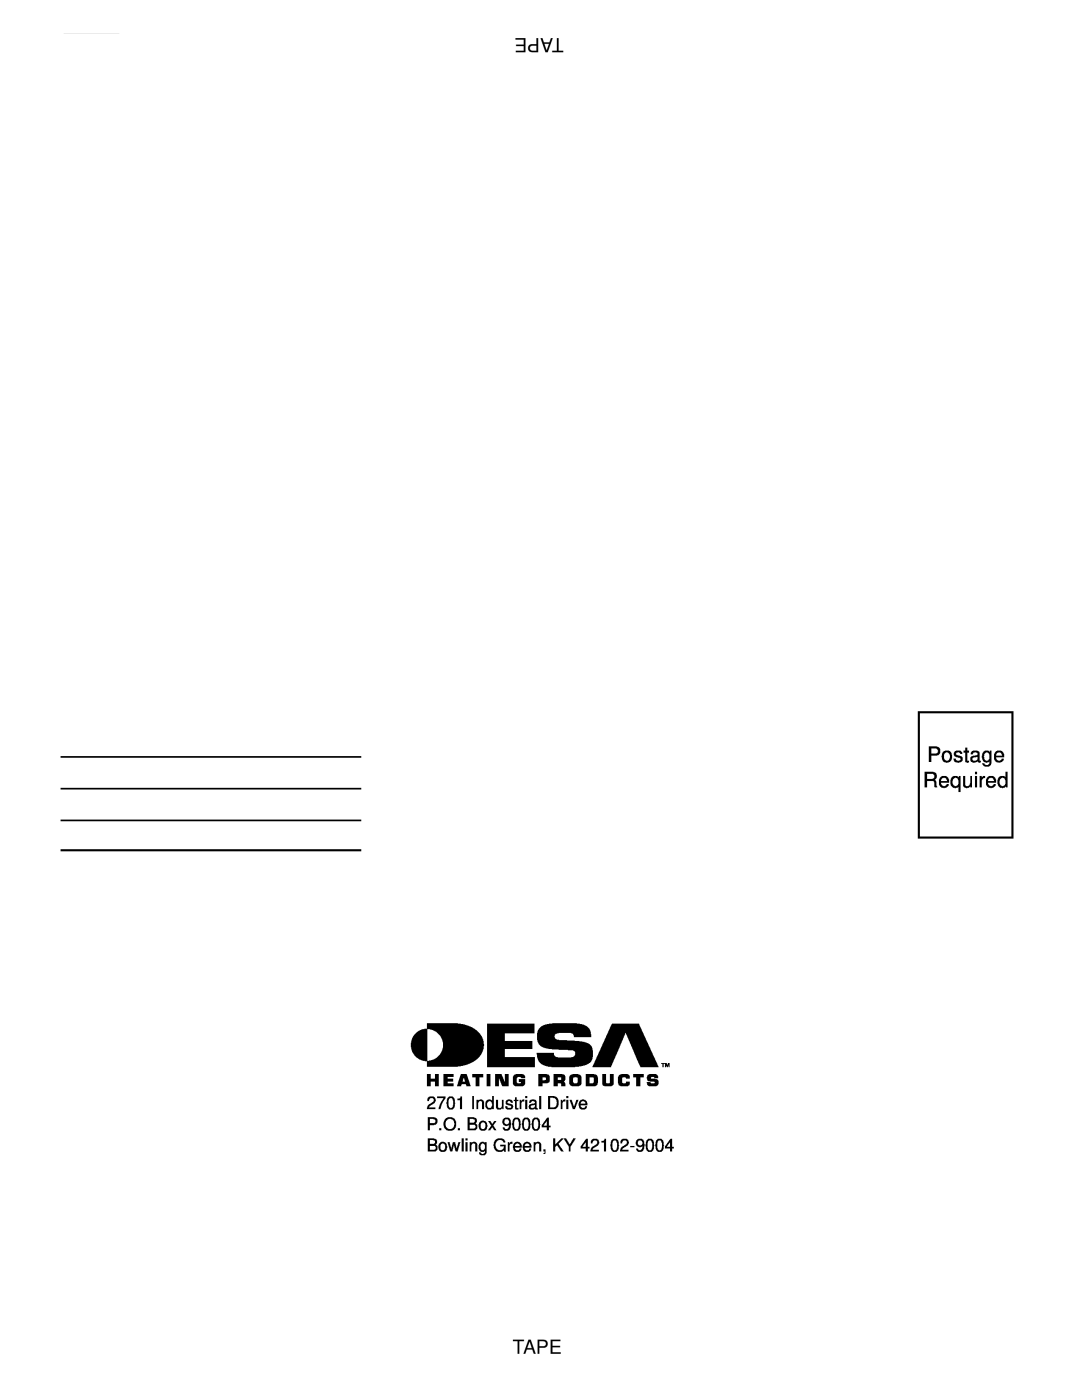 Desa CBN20 installation manual Postage Required, Tape, Industrial Drive P.O. Box Bowling Green, KY 